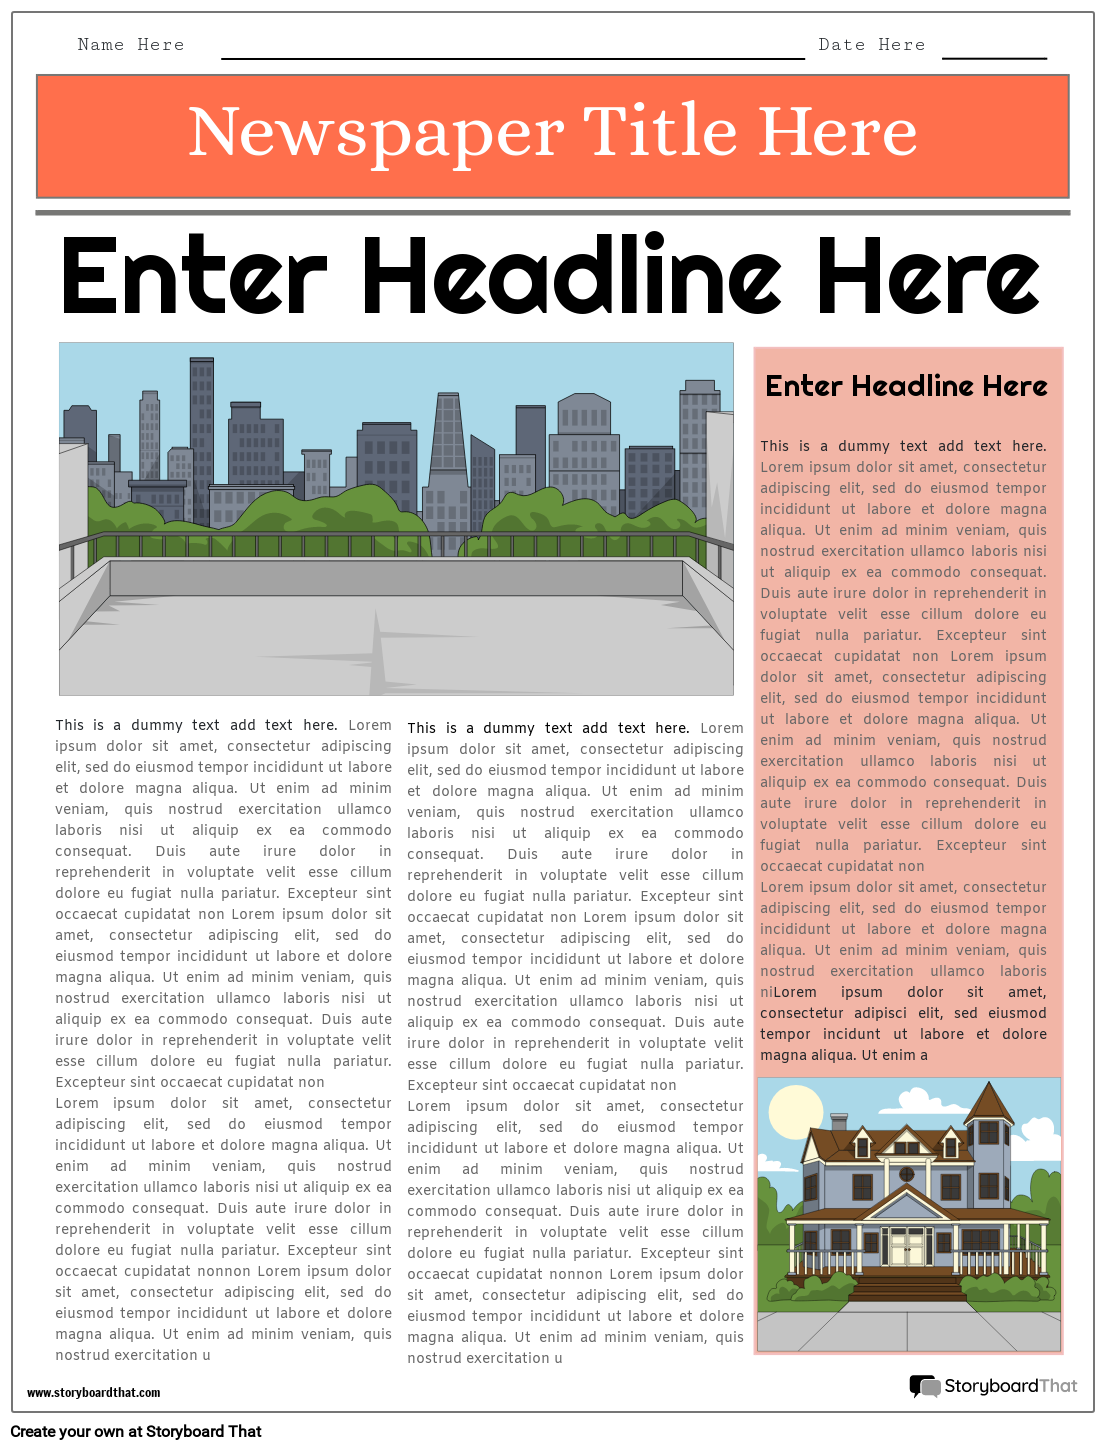 Newspaper Project Template Featuring a Big Headline